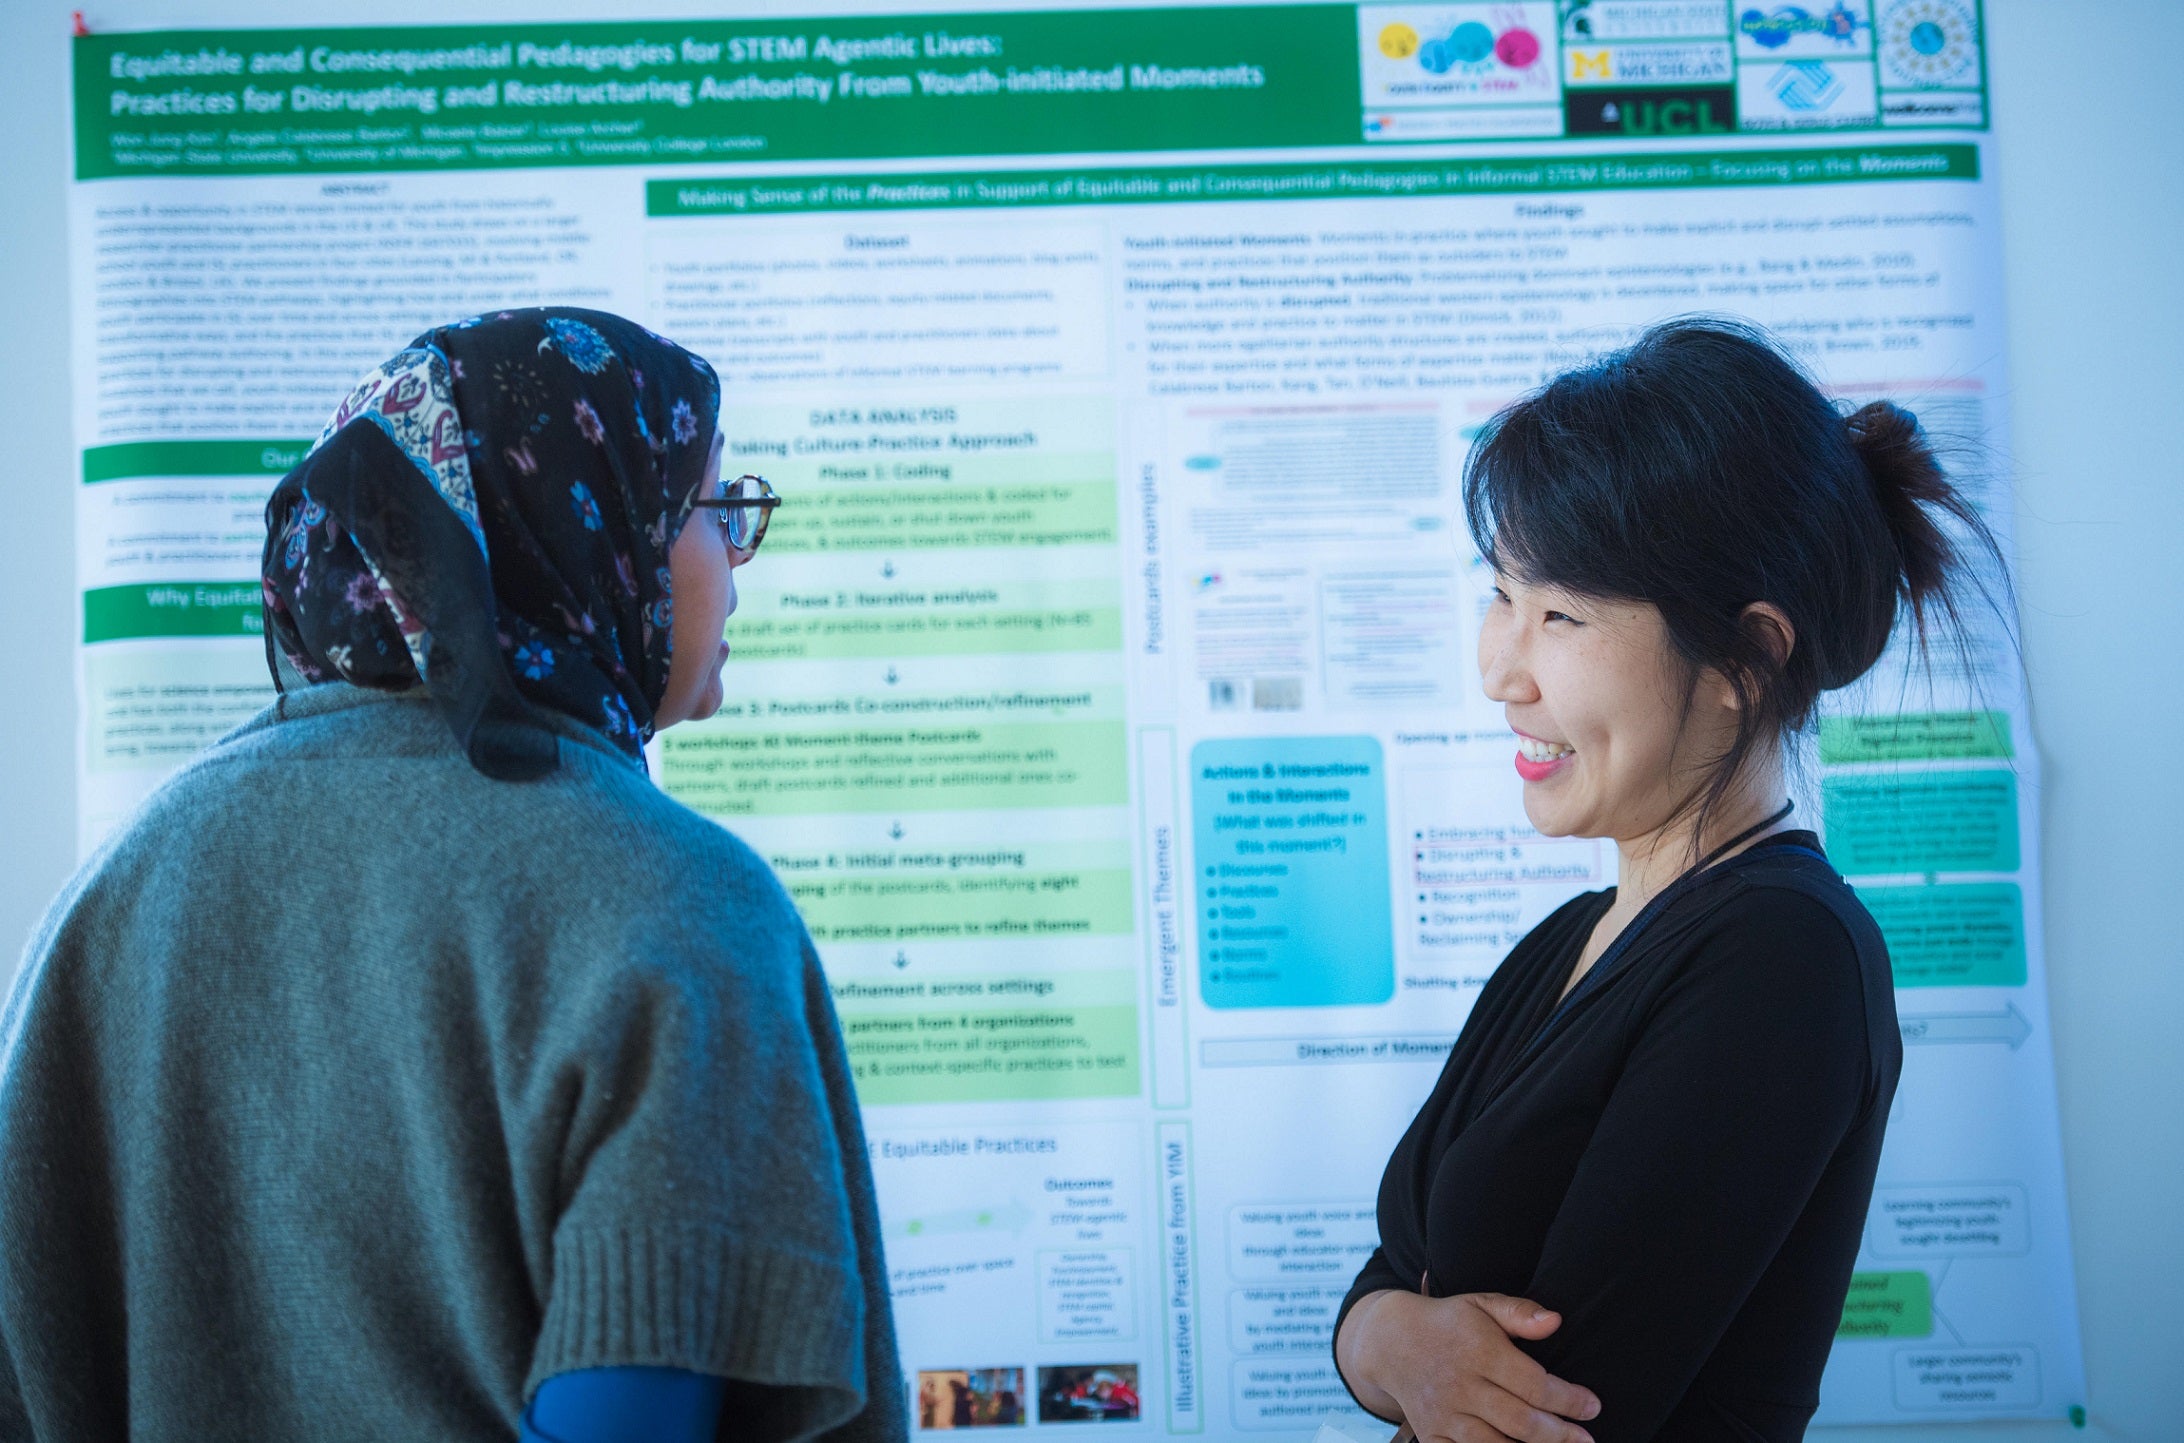 Two women talk in front of a scientific poster. One wears a headscarf, glasses, and a green sweater. The other woman with black hair smiles and listens.